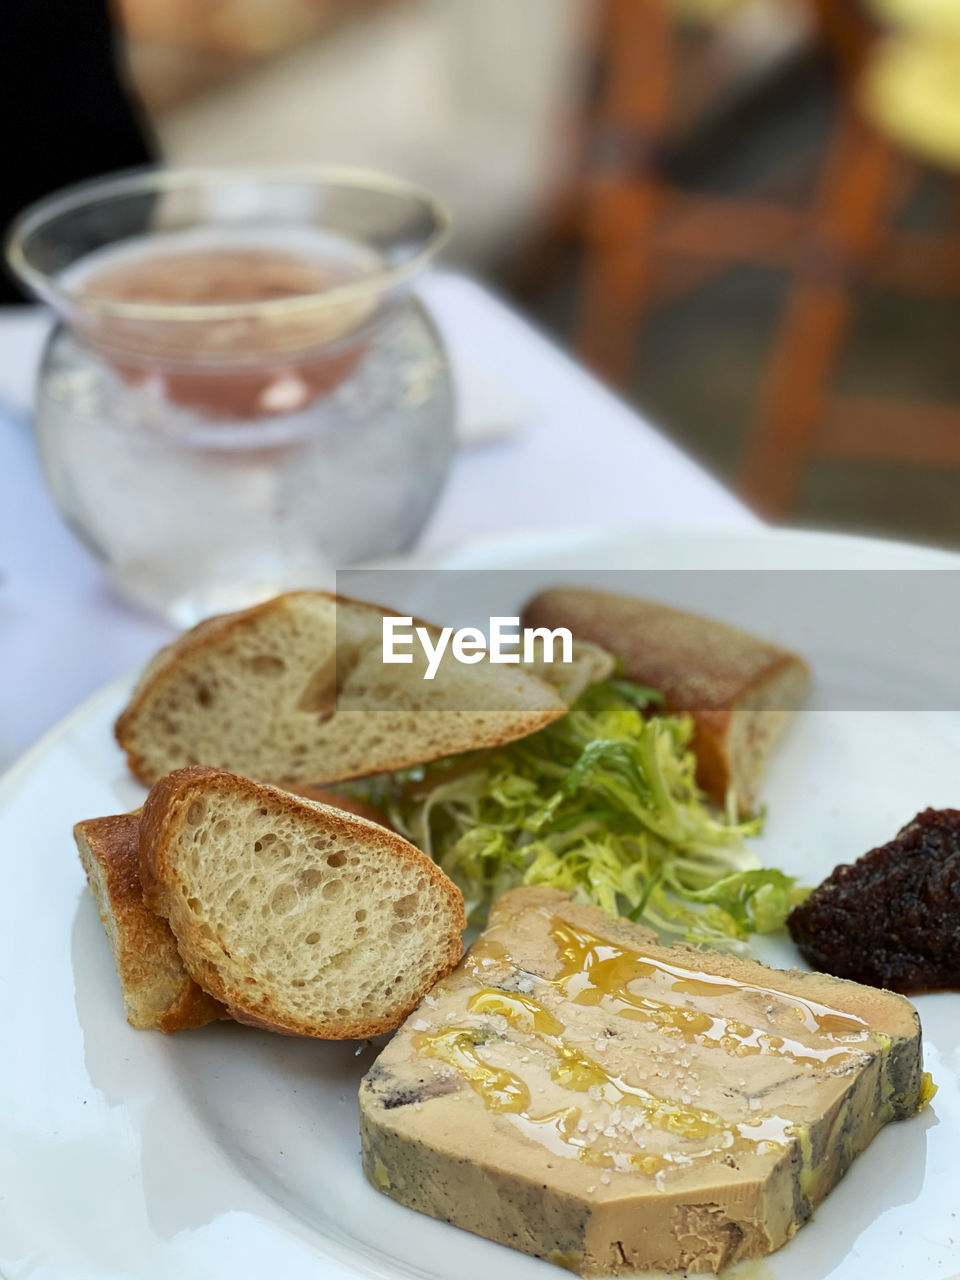 food and drink, food, bread, healthy eating, dish, lunch, meal, breakfast, wellbeing, plate, baked, vegetable, brunch, freshness, rye bread, no people, produce, cuisine, indoors, focus on foreground, sliced bread, toasted bread, close-up, slice, meat